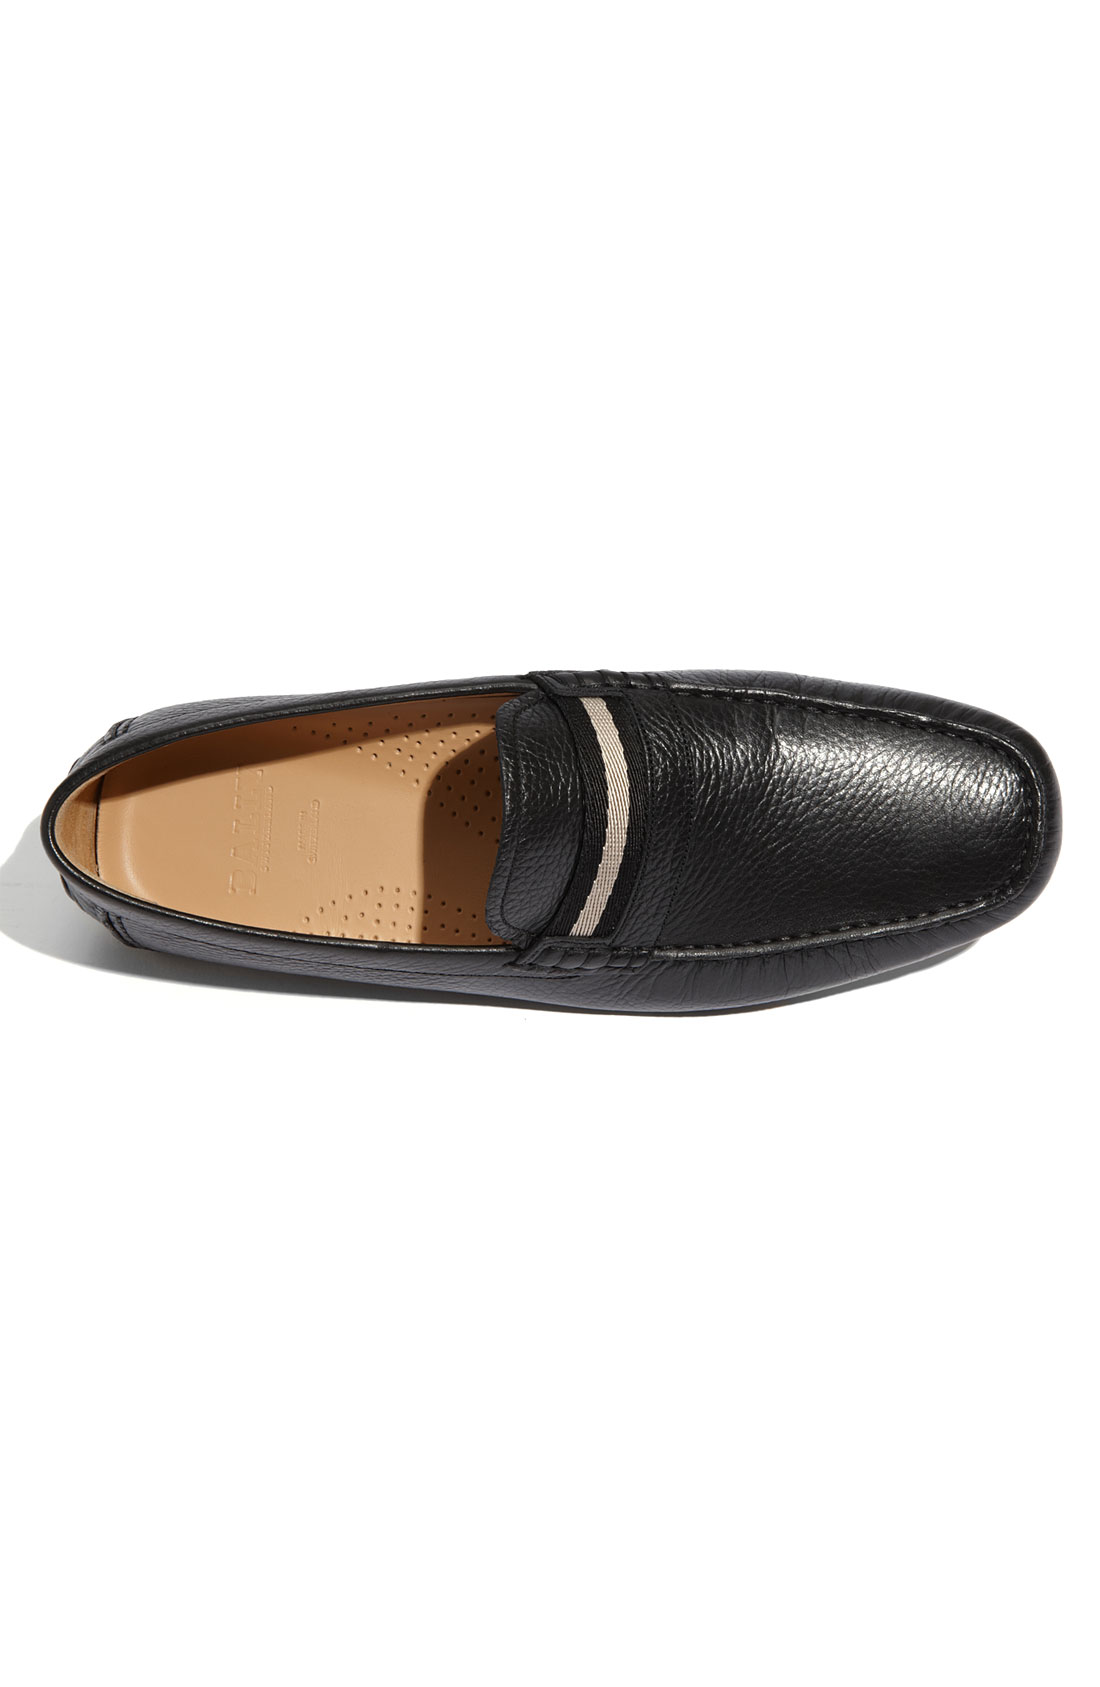 Bally Trainspot Croc-Embossed Leather Driving Loafers in Black for Men ...